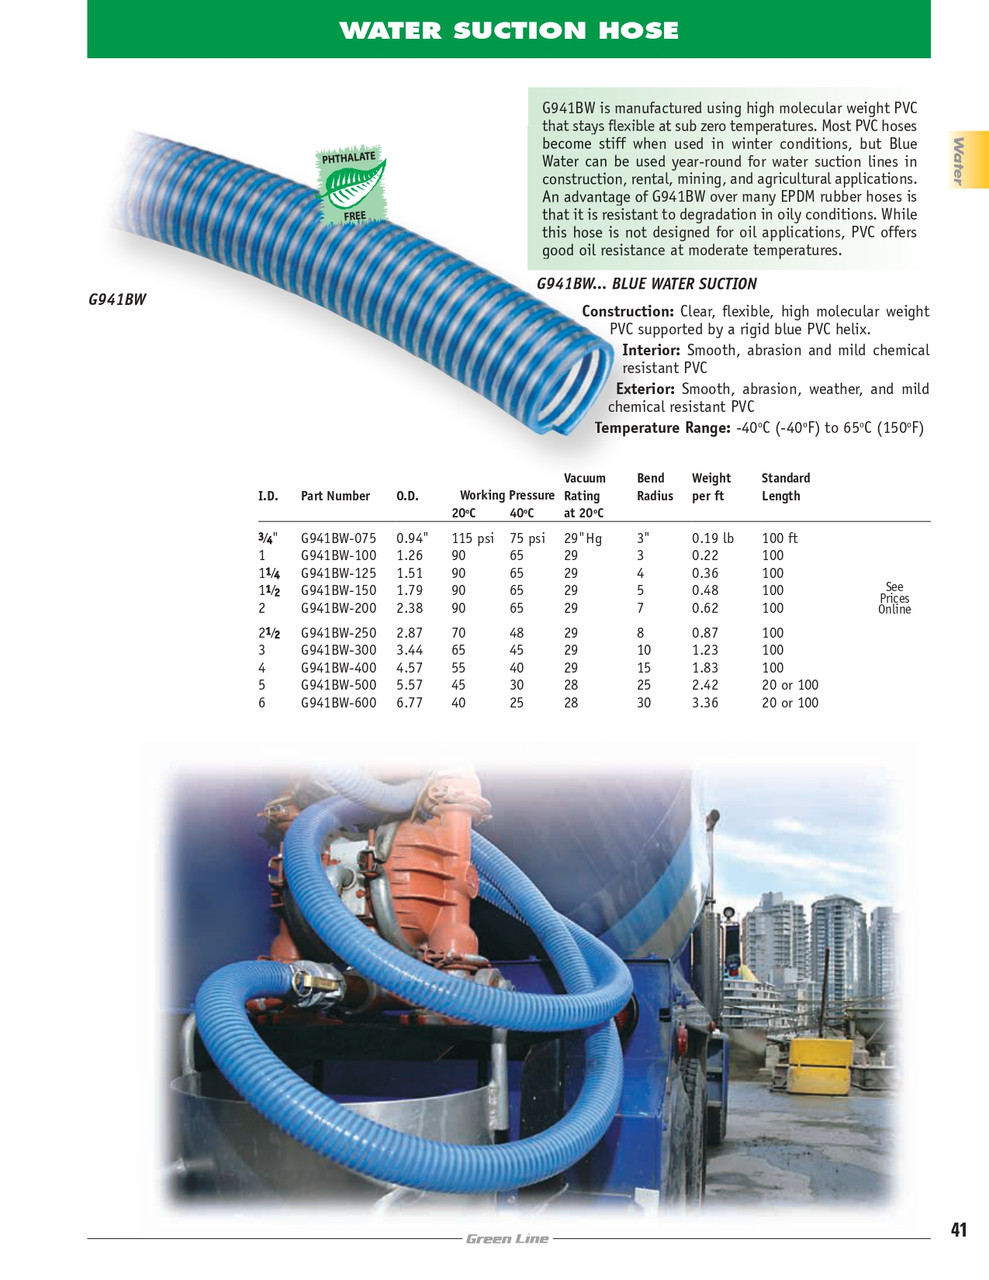 2-1/2" PVC Blue Water Suction Hose    G941BW-250